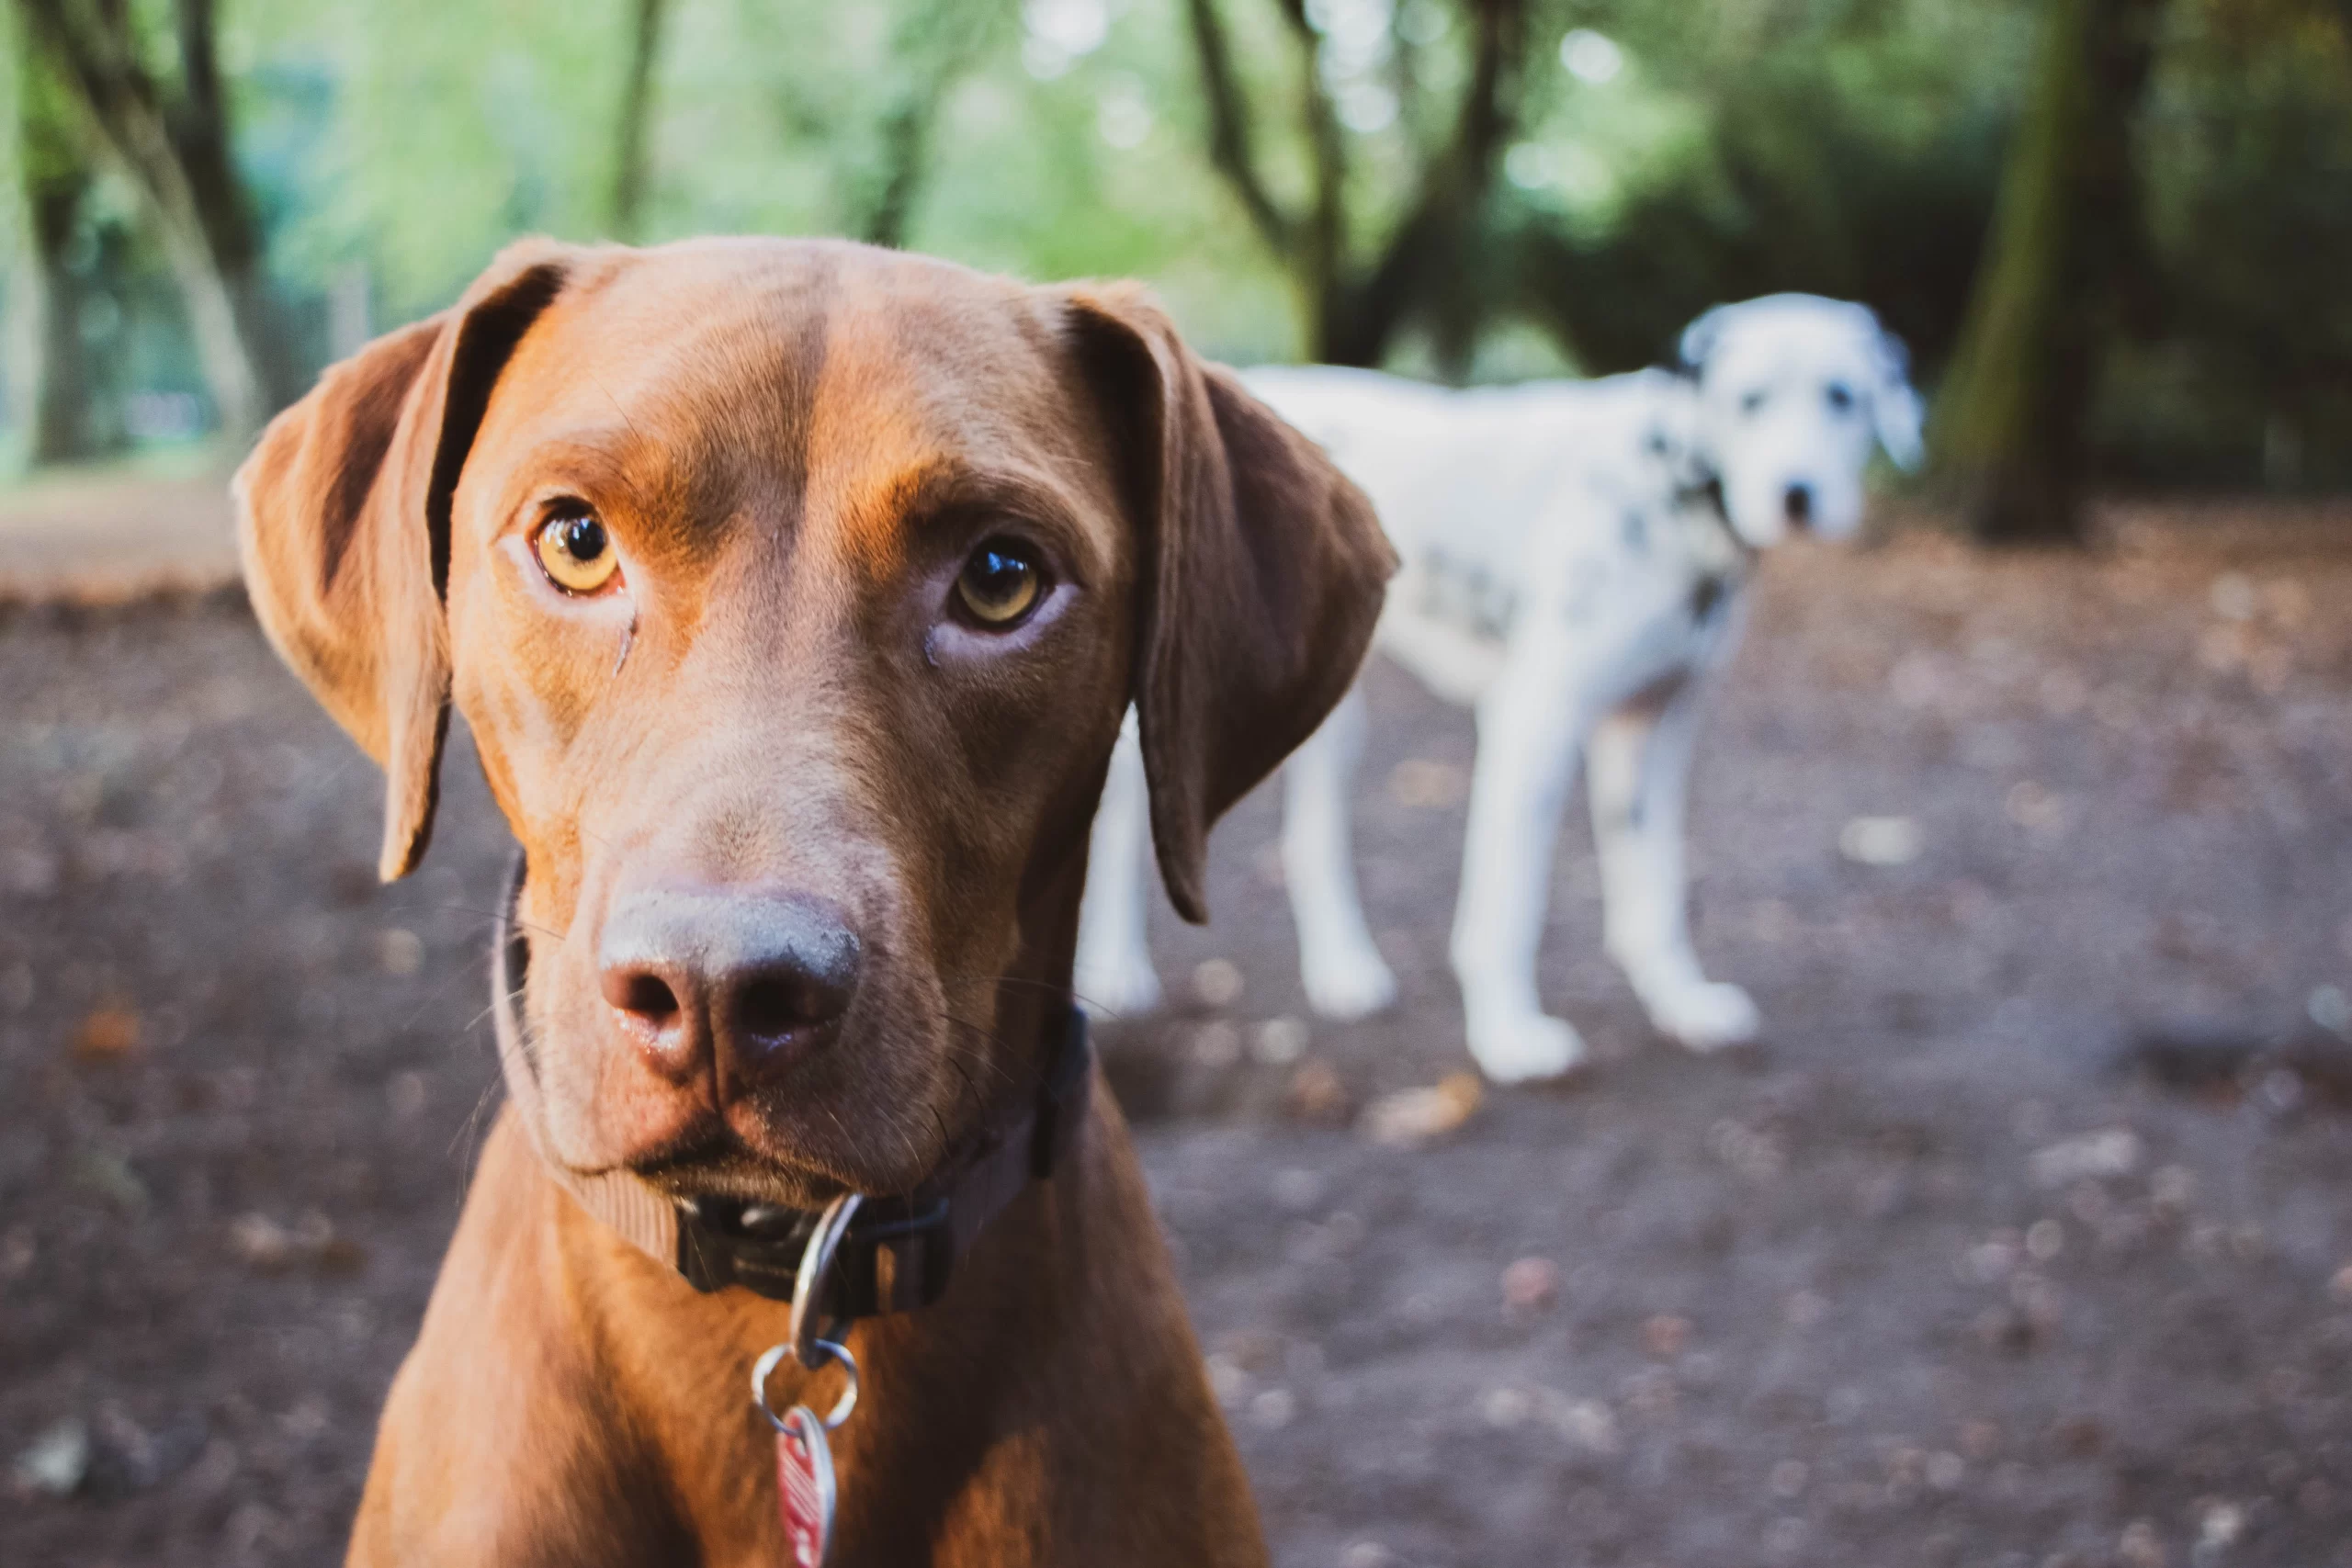 ey_lena-two dogs brown in foreground while spotted white with black spost in back ground -unsplash